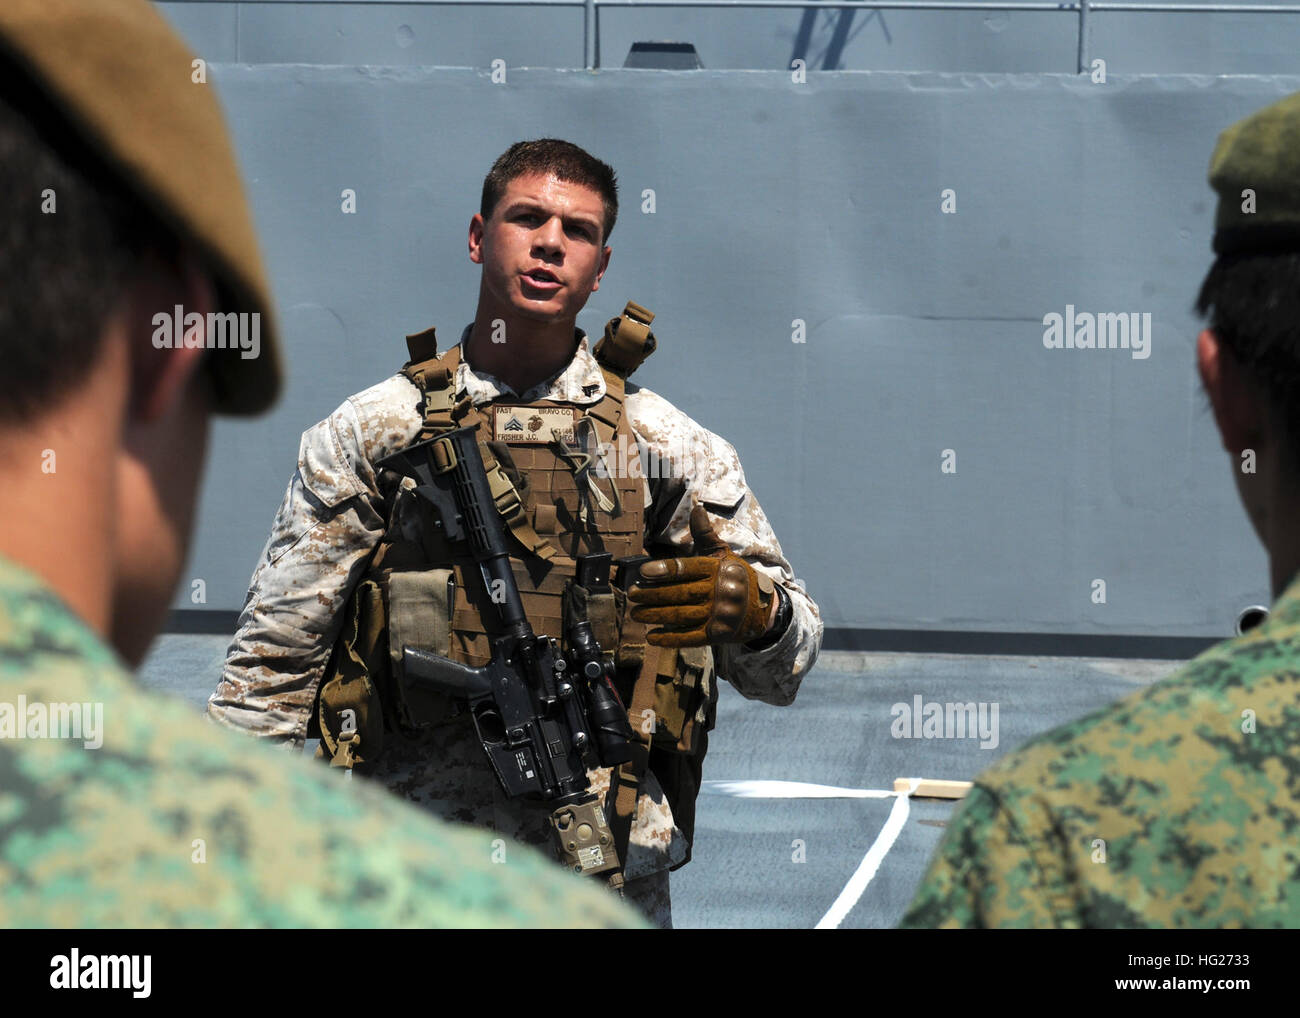 150505-N-KG618-051 SINGAPORE (May 5, 2015) - Cpl. Jay Frisher, center, attached to Fleet Antiterrorism Security Team Pacific, answers questions from members of the Singapore Armed Forces on the main deck of U.S. 7th Fleet flagship USS Blue Ridge (LCC 19). Blue Ridge is conducting a port visit in Singapore to build multilateral partnerships, volunteer through community service projects and explore everything Singapore has to offer, strengthening relationships with the people. (U.S. Navy photo by Mass Communication Specialist 3rd Class Kevin A. Flinn/RELEASED) USS Blue Ridge in Singapore 150505- Stock Photo